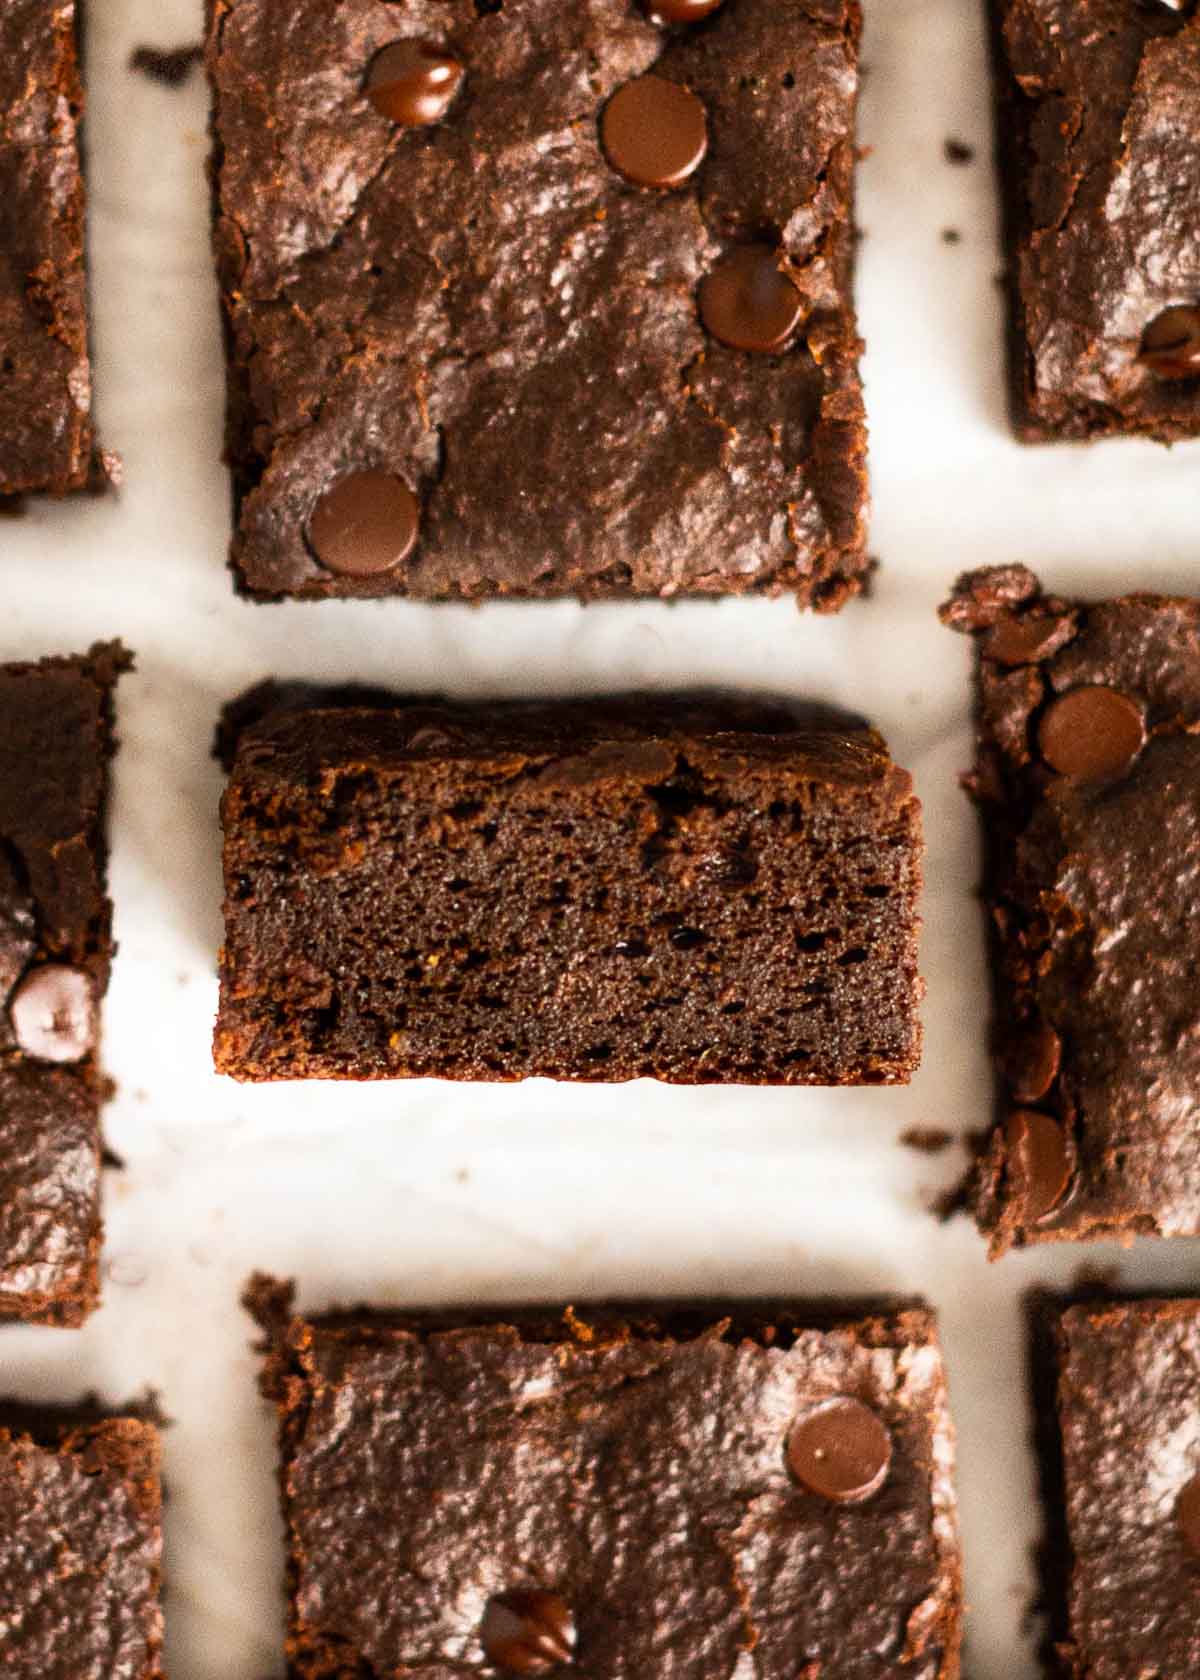 Close up of a brownie square on its side, next to other brownie squares